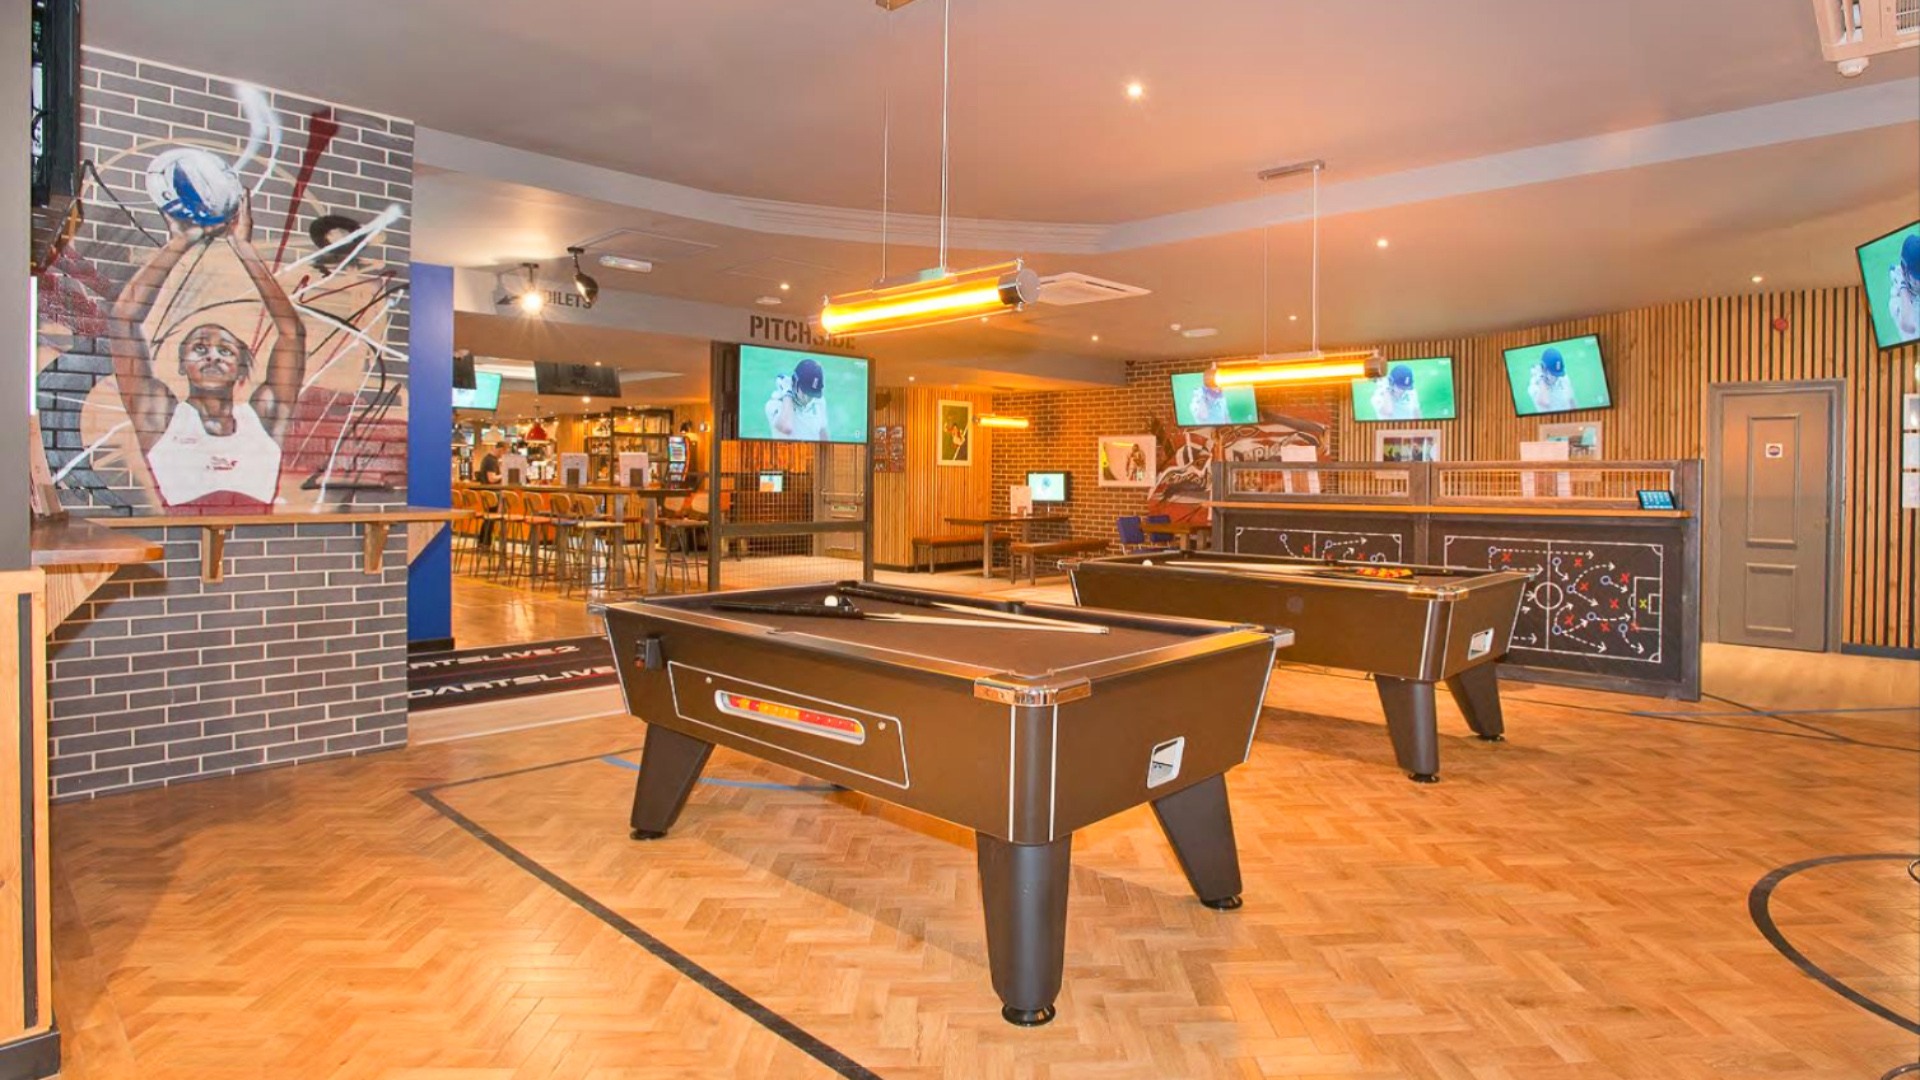 Billiards Bar Near Me Join us at the Sports Ground at Sports Bar and Grill | Old Street